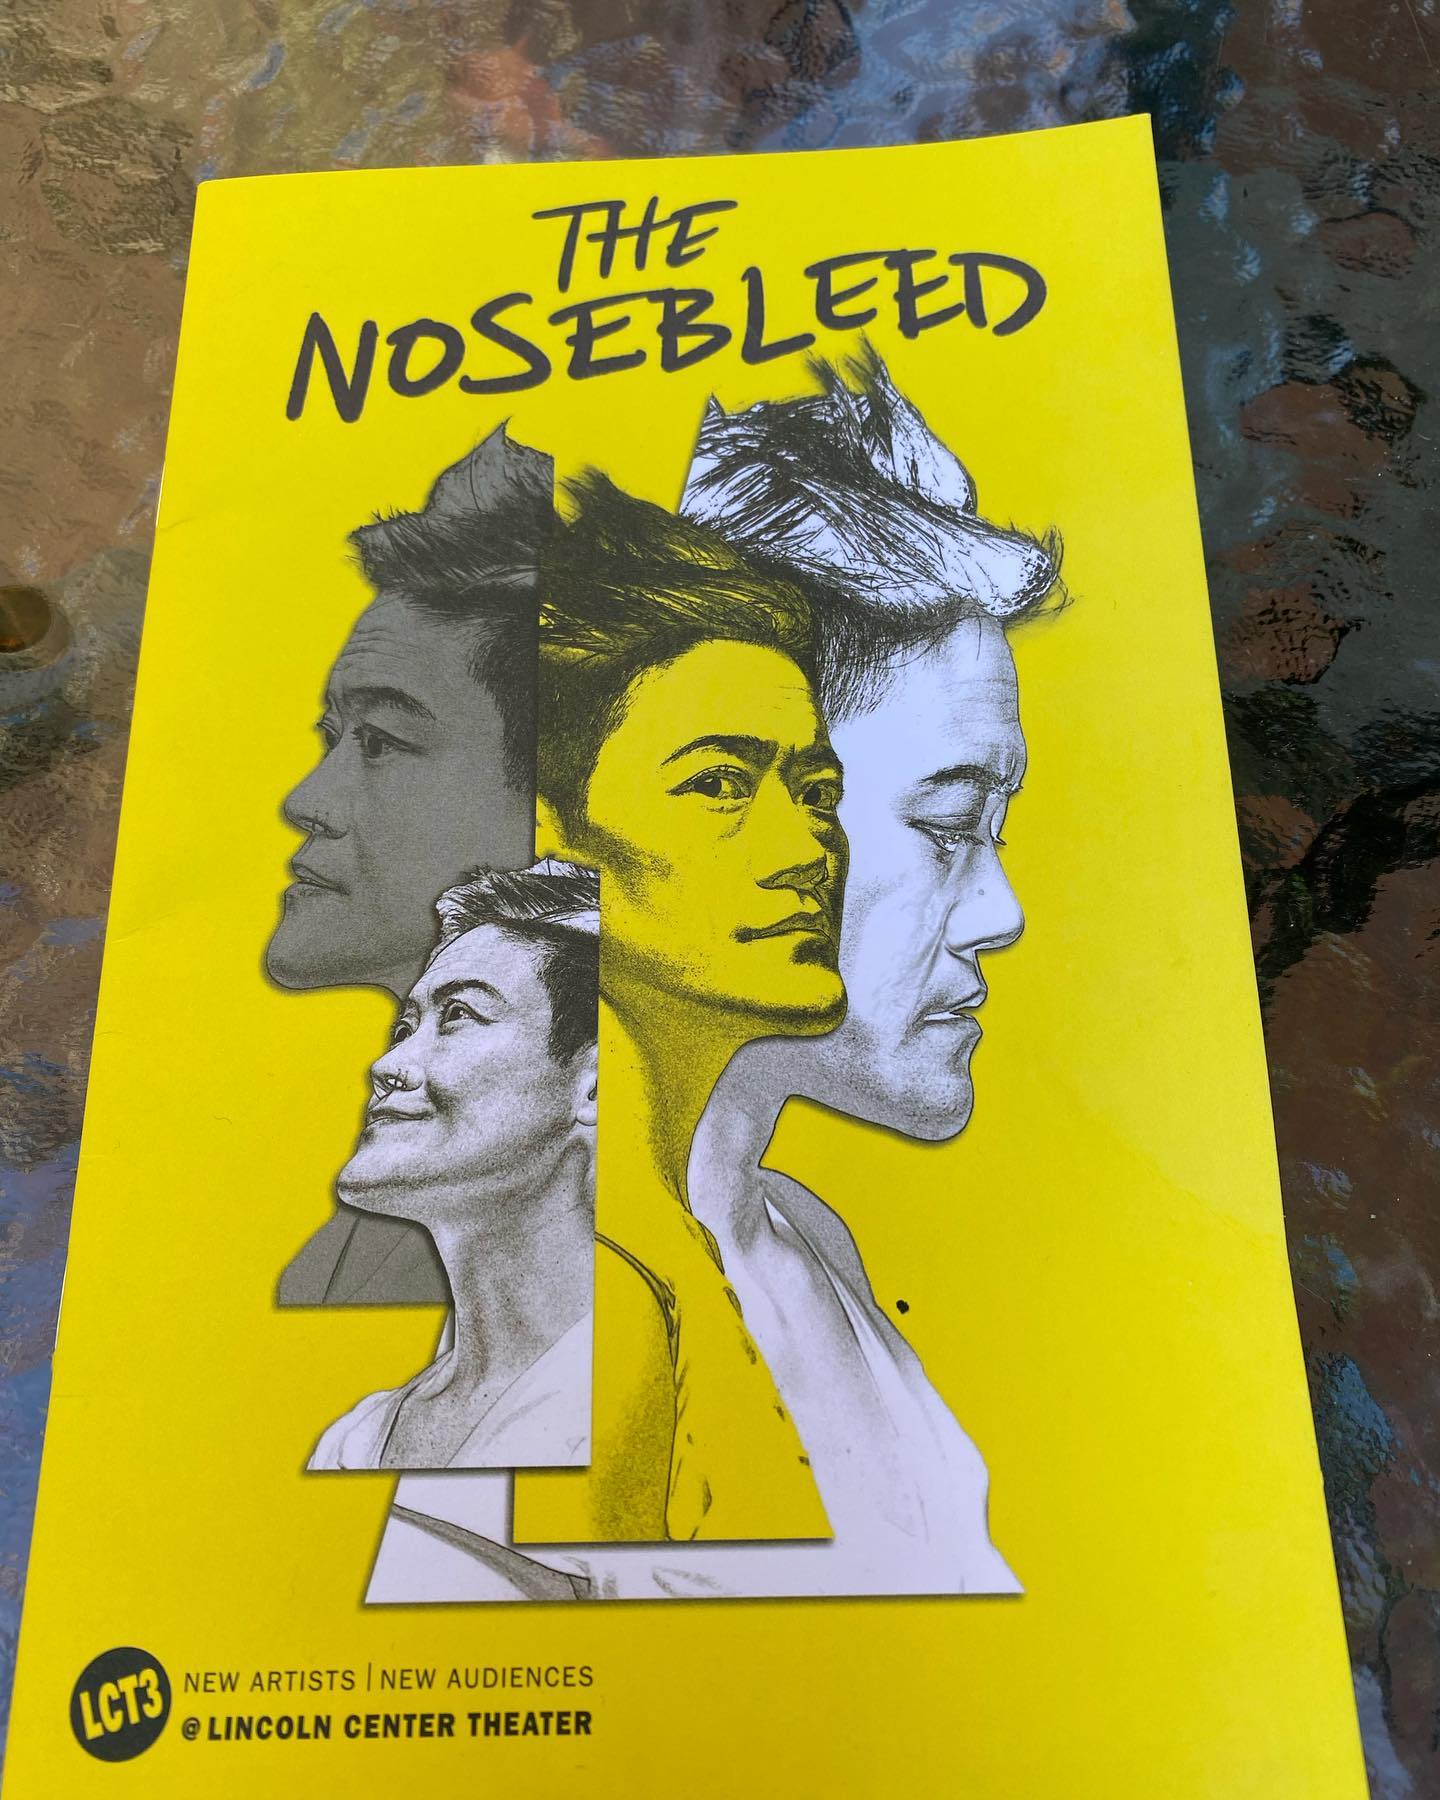 Aya Agawa’s The Nosebleed is provocative in form and structure, including a malleable fourth wall. At the same time it is so specifically personal that it offers all of us (including my wonderful three companions and I) the opportunity to relate.  @lctheater at the Claire Tow is a fantastic space to see new, fresh work!! #lincolncentertheater #offbroadway #offbroadwayplay #nyctheatre #newplays #livetheatre #playwrights #ilovetheatre #funwithfriends